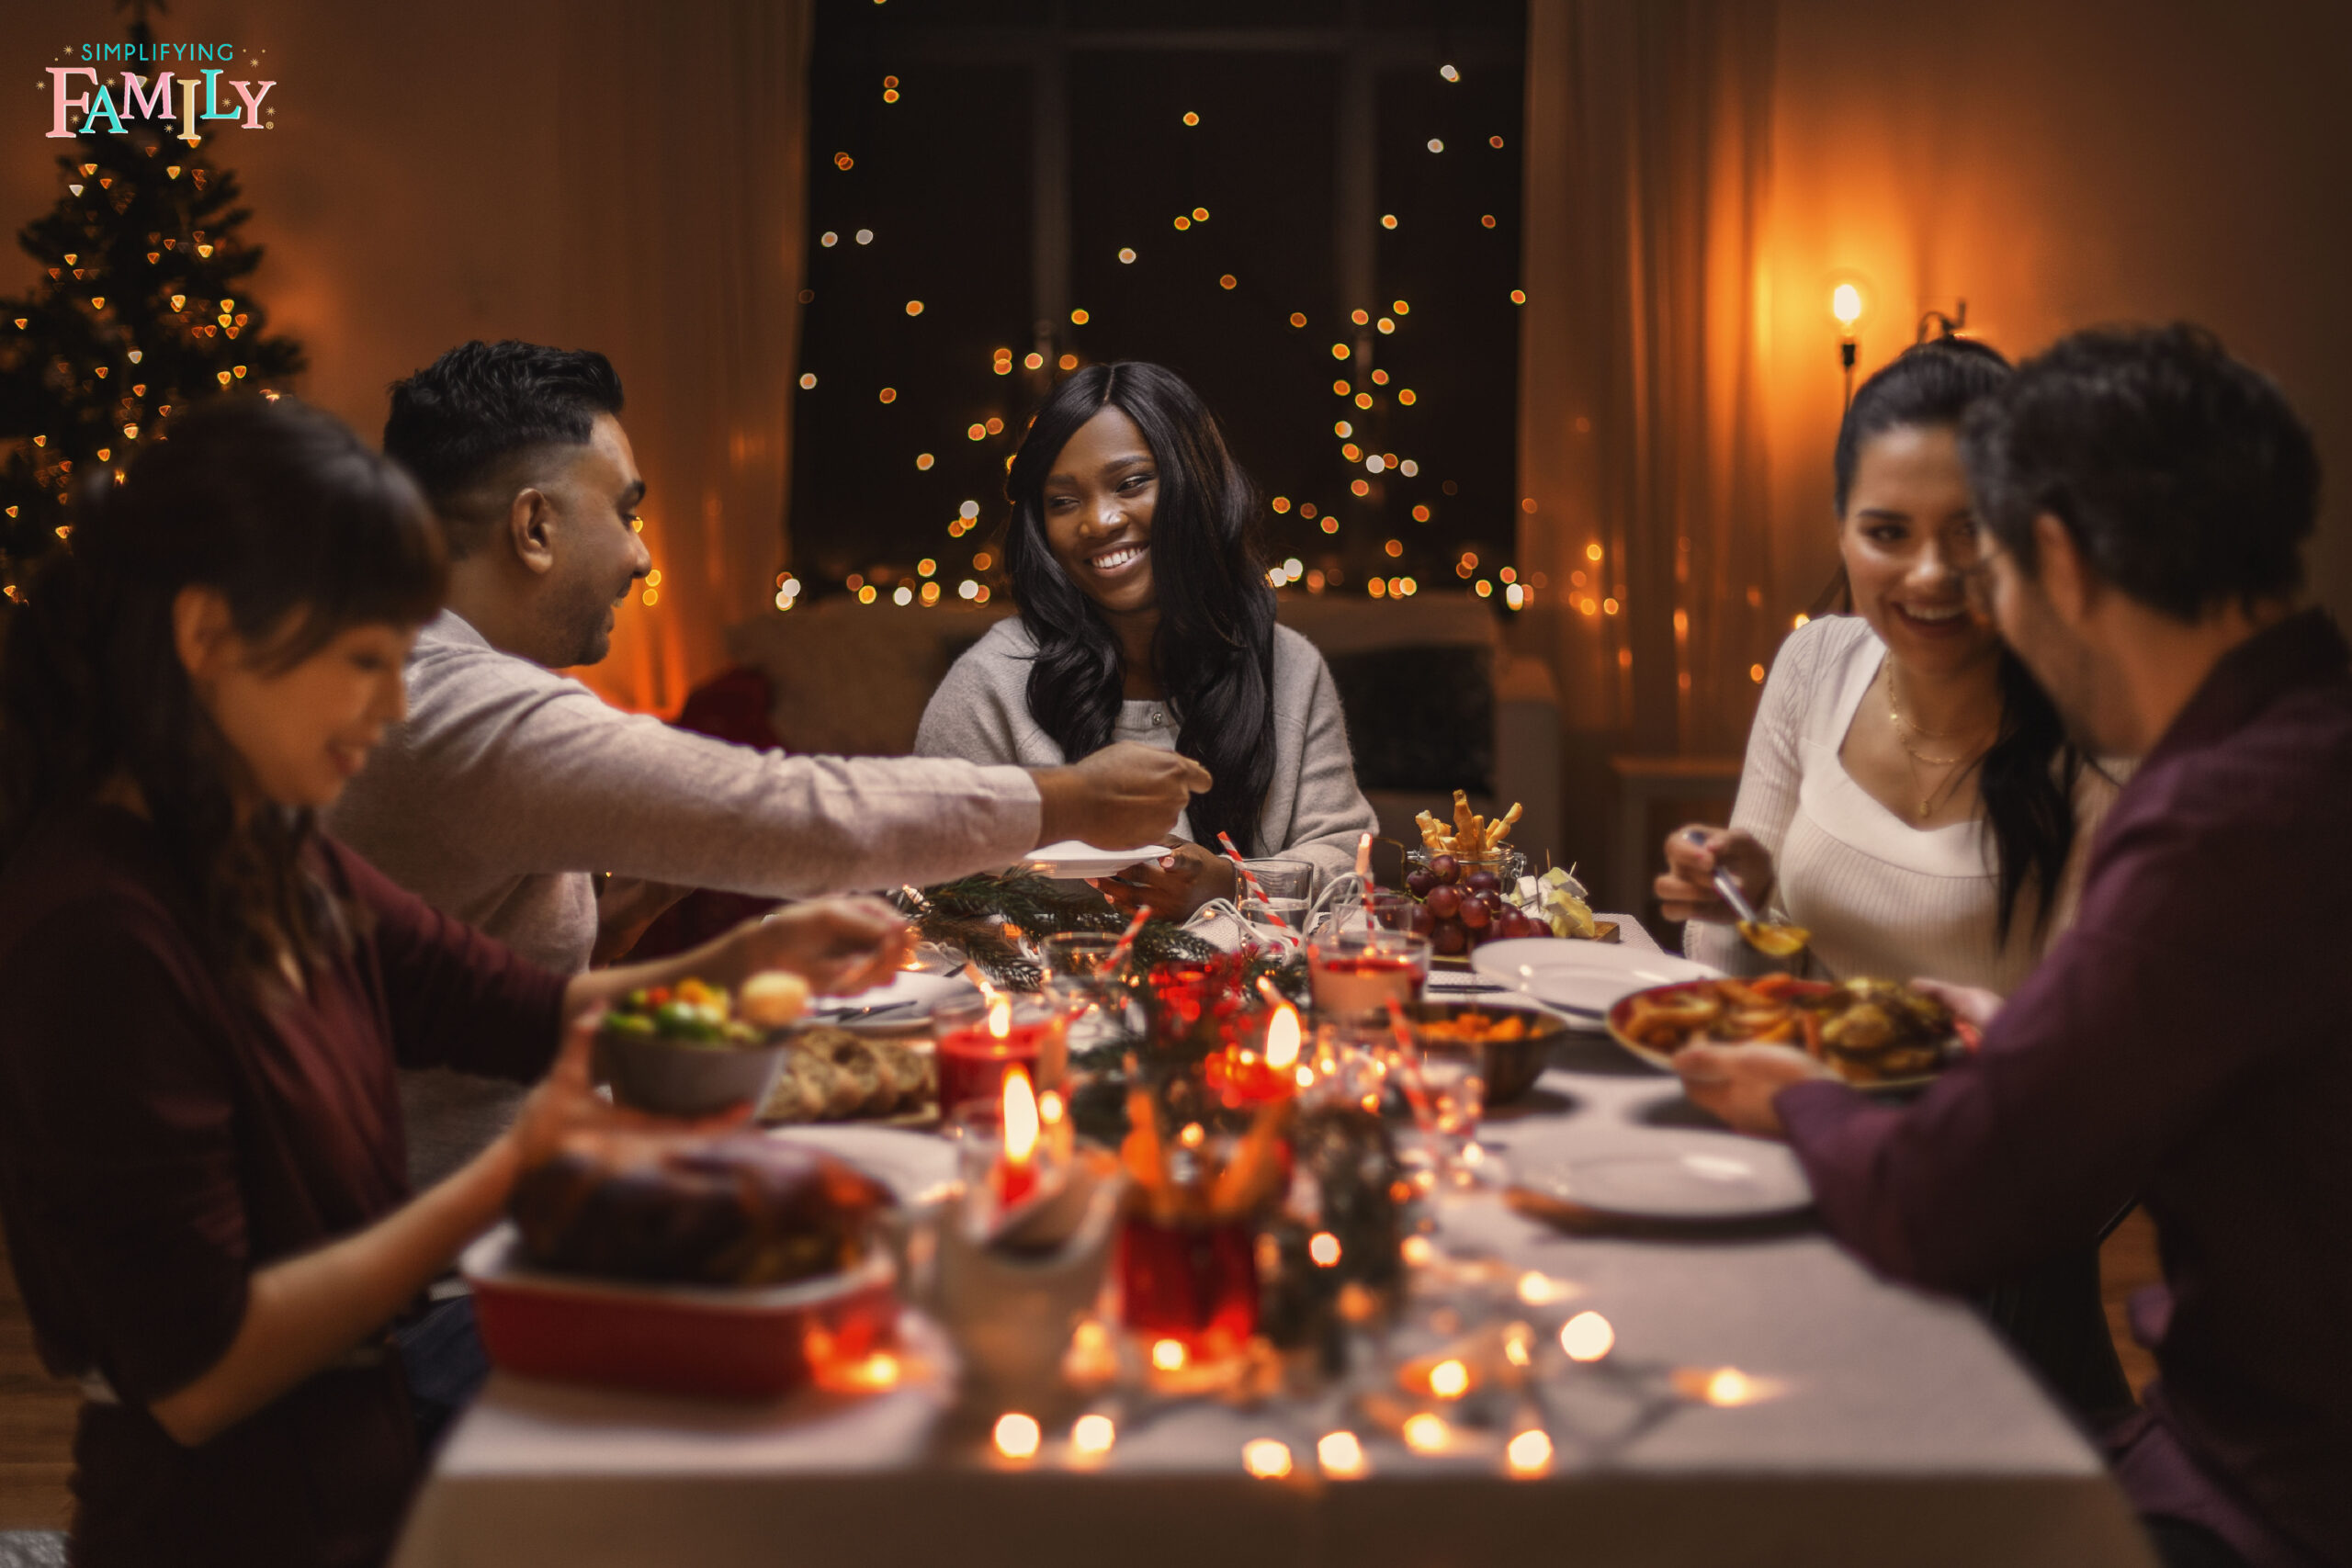 6 Secrets to Spend More Time Enjoying the Holidays and Less Time Stressed Out